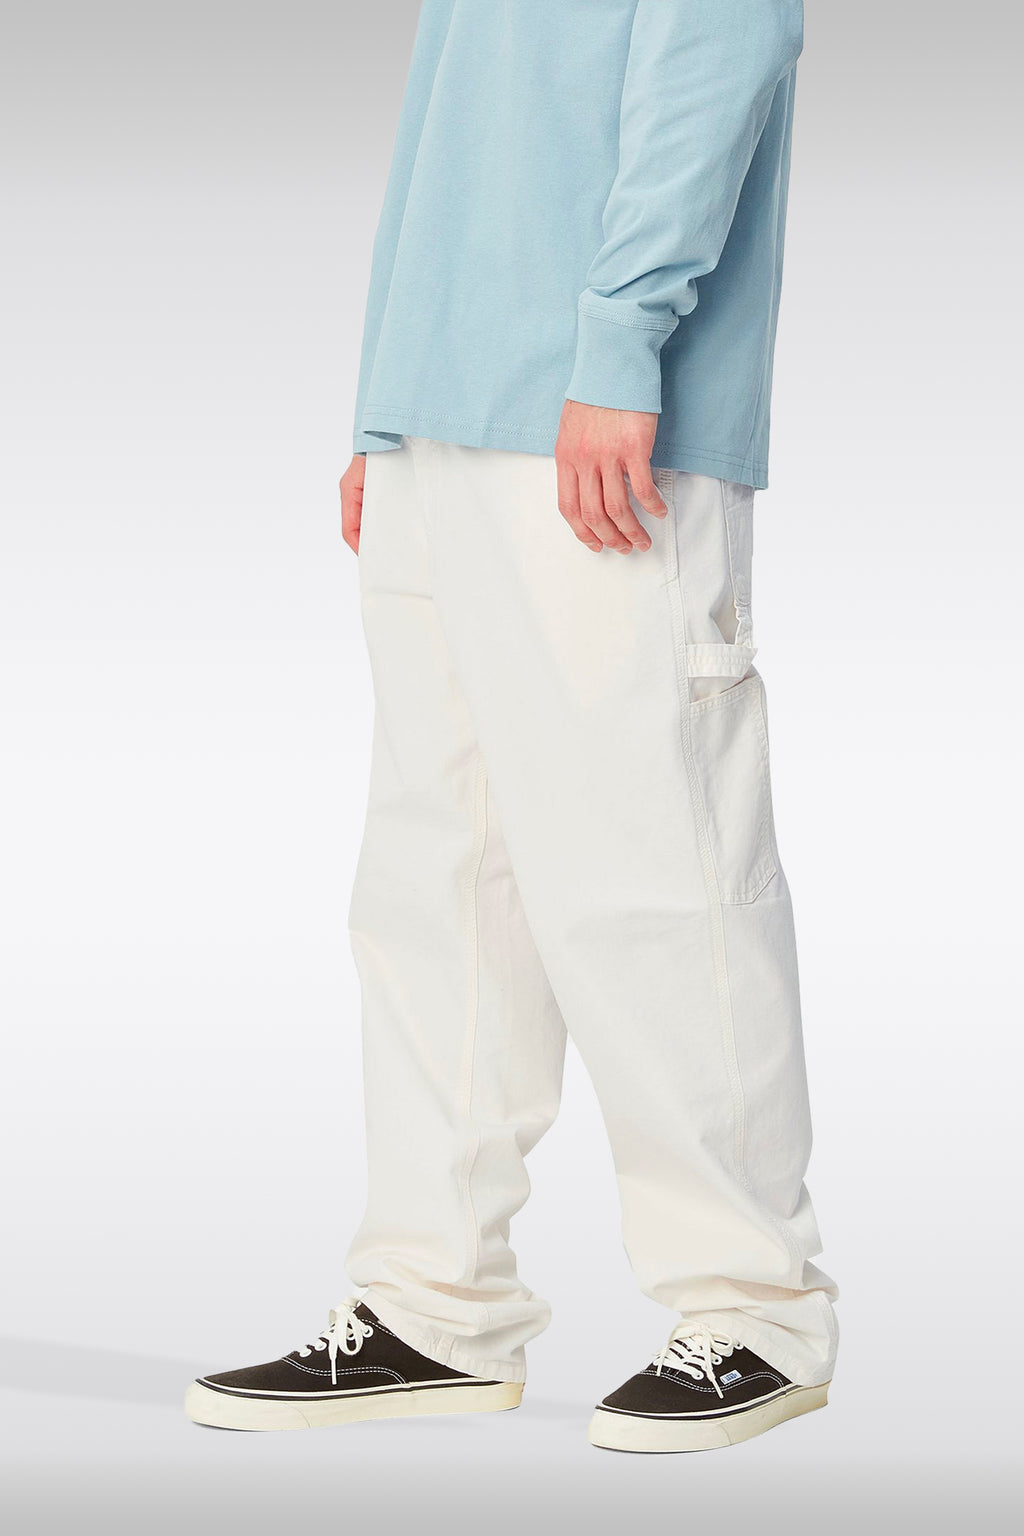 alt-image__Off-white-cotton-drill-worker-pant---Single-Knee-Pant-